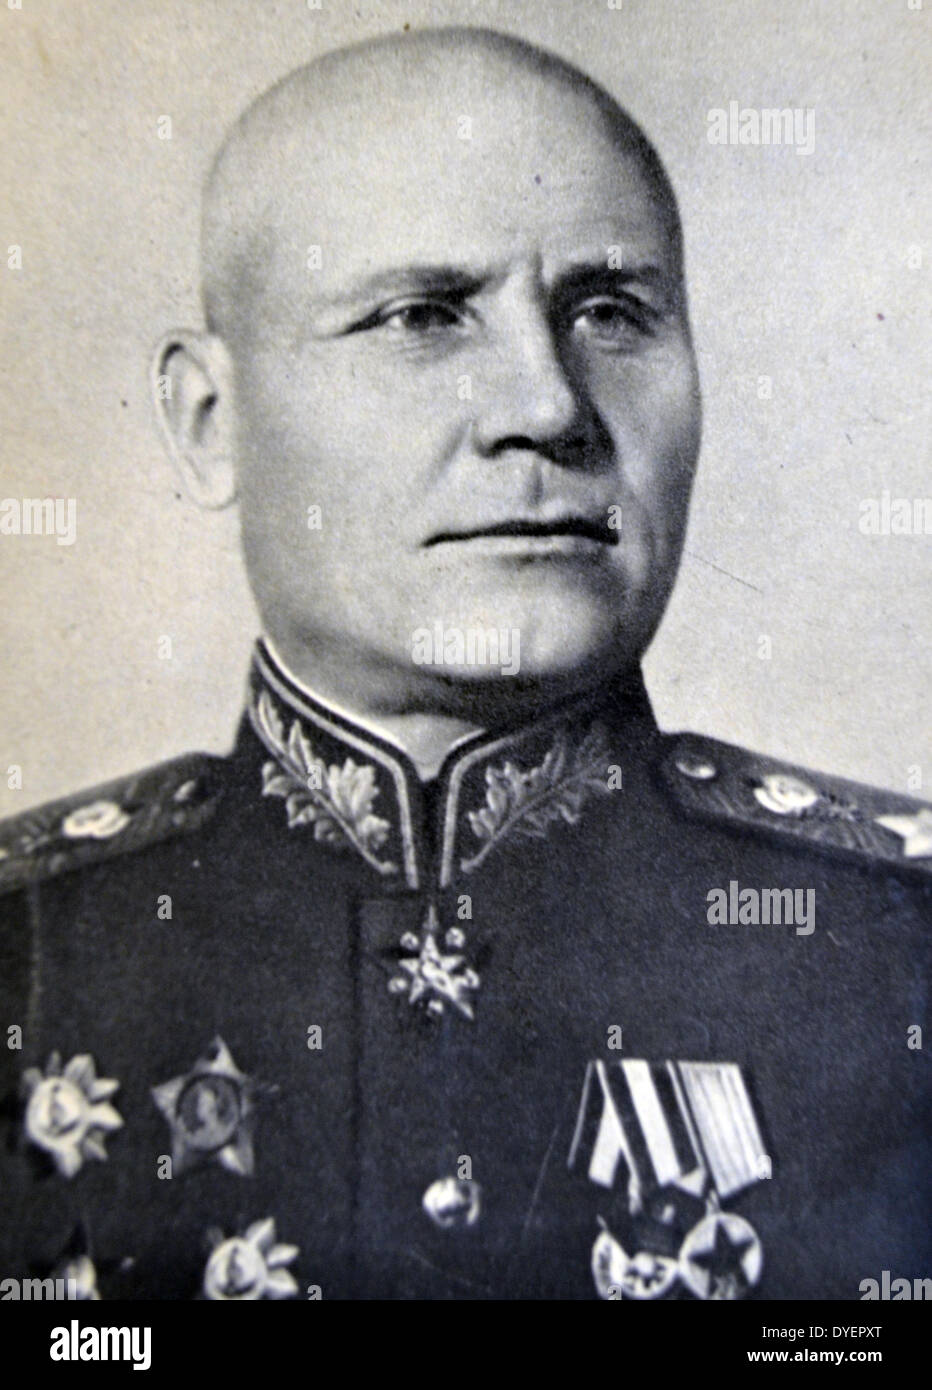 Ivan Stepanovich Konev (1897 – 21 May 1973), Soviet military commander, who led Red Army forces on the Eastern Front during World War II, retook much of Eastern Europe from occupation by the Axis Powers, and helped in the capture of Germany's capital, Berlin.  In 1956, as the Commander of Warsaw Pact forces, Konev led the suppression of the Hungarian Revolution by Soviet armoured divisions. Stock Photo